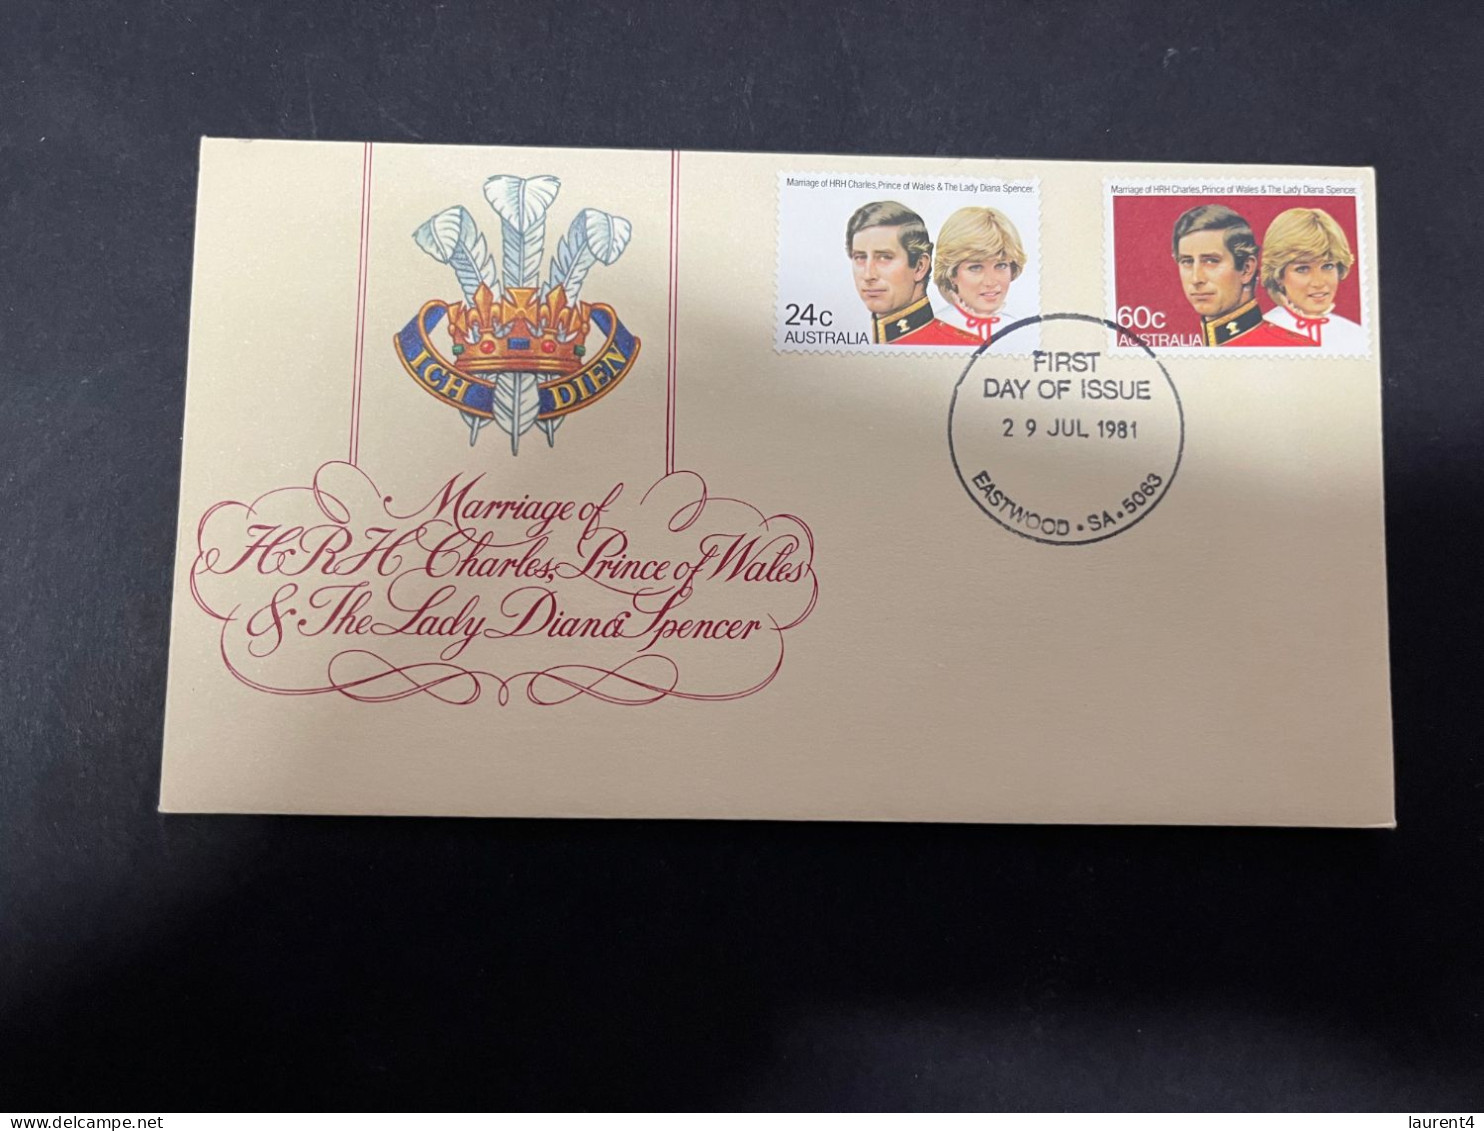 11-5-2023 (4 Z 42) Australia FDC (1 Covers) 1981 - Royal Wedding (Eastwood NSW P/m) - Primo Giorno D'emissione (FDC)